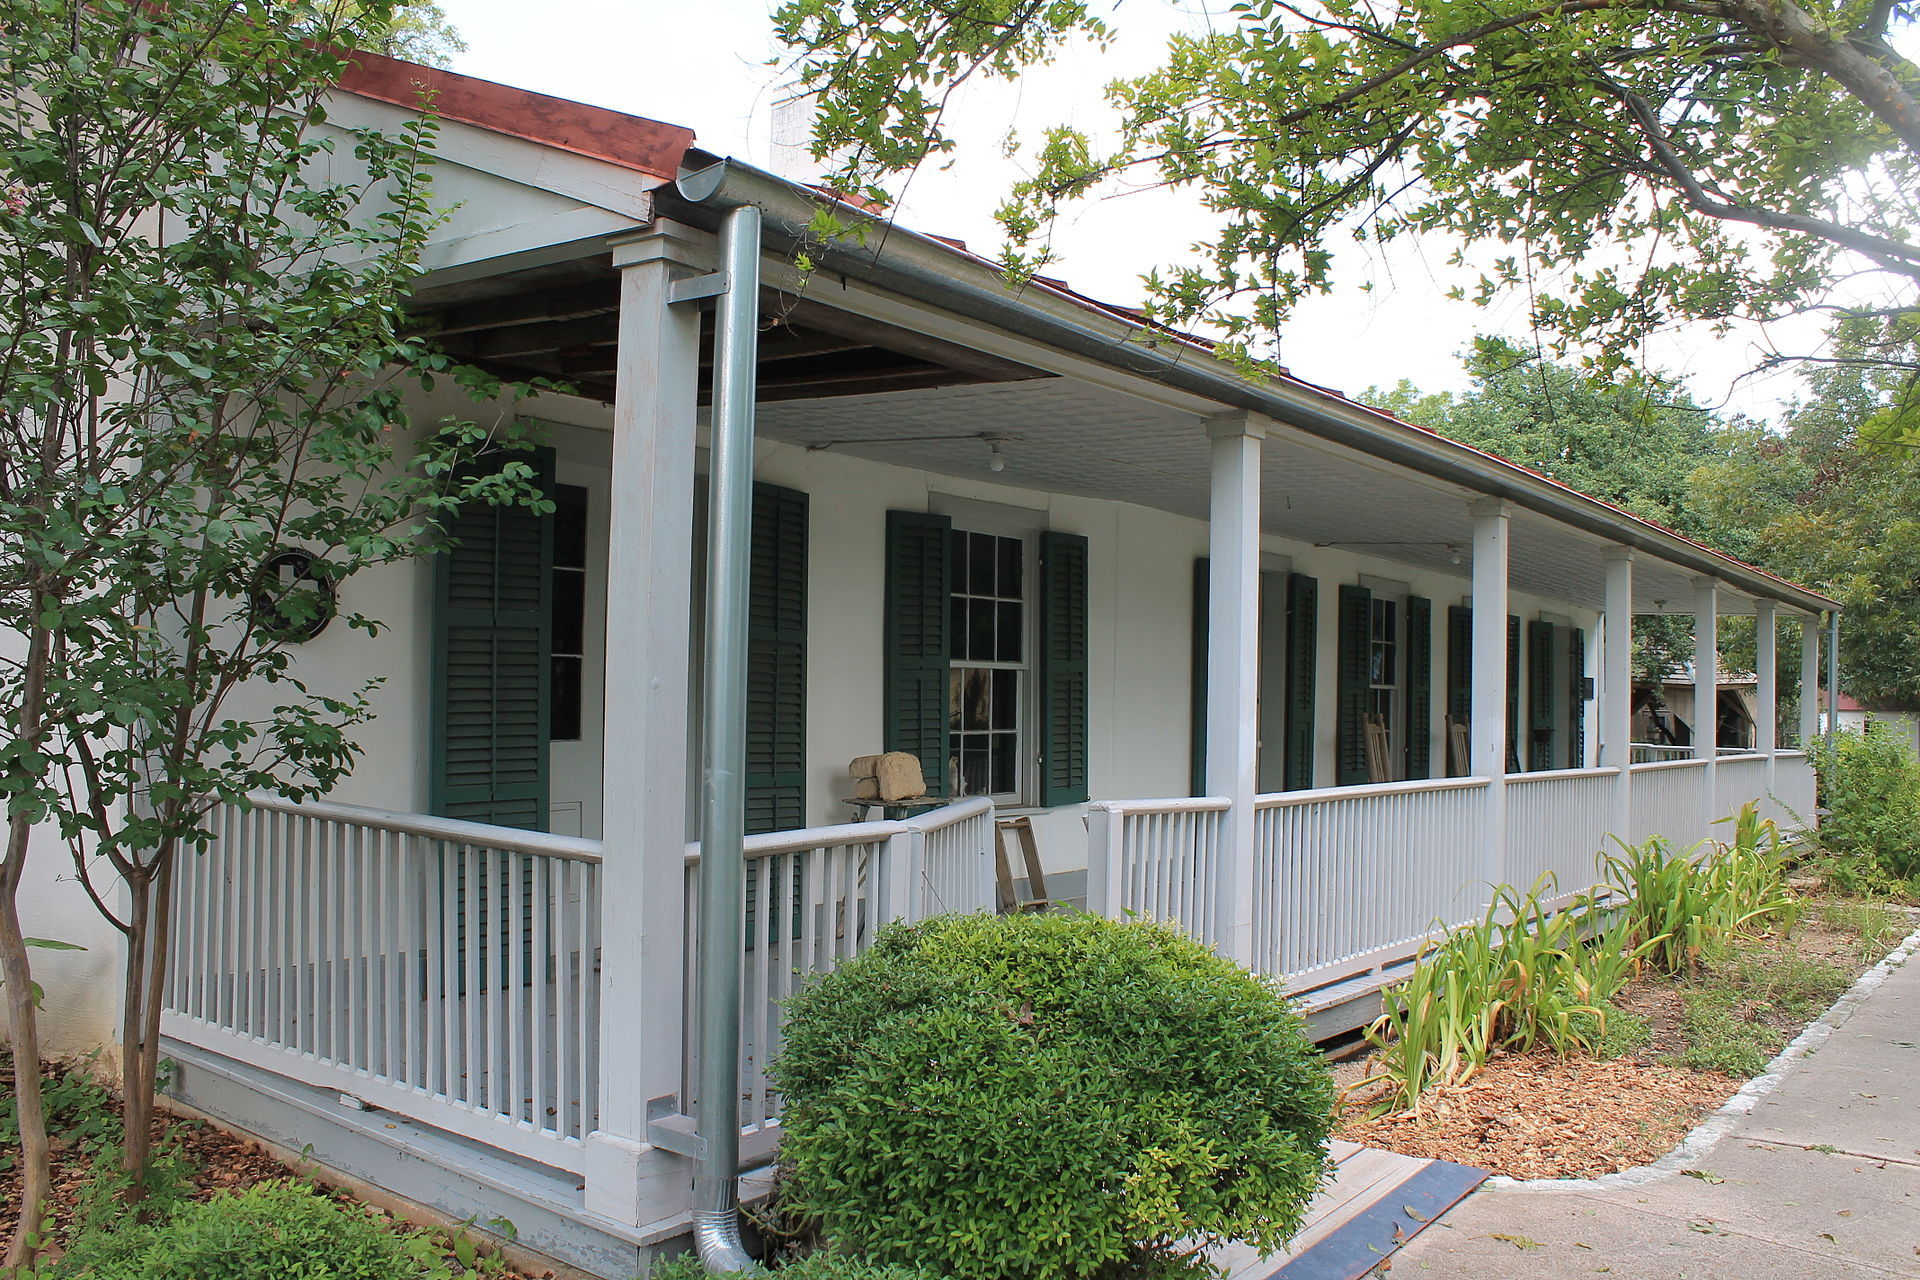 The Yturri-Edmunds House was completed by 1860 and is one of the few remaining adobe block houses in San Antonio.